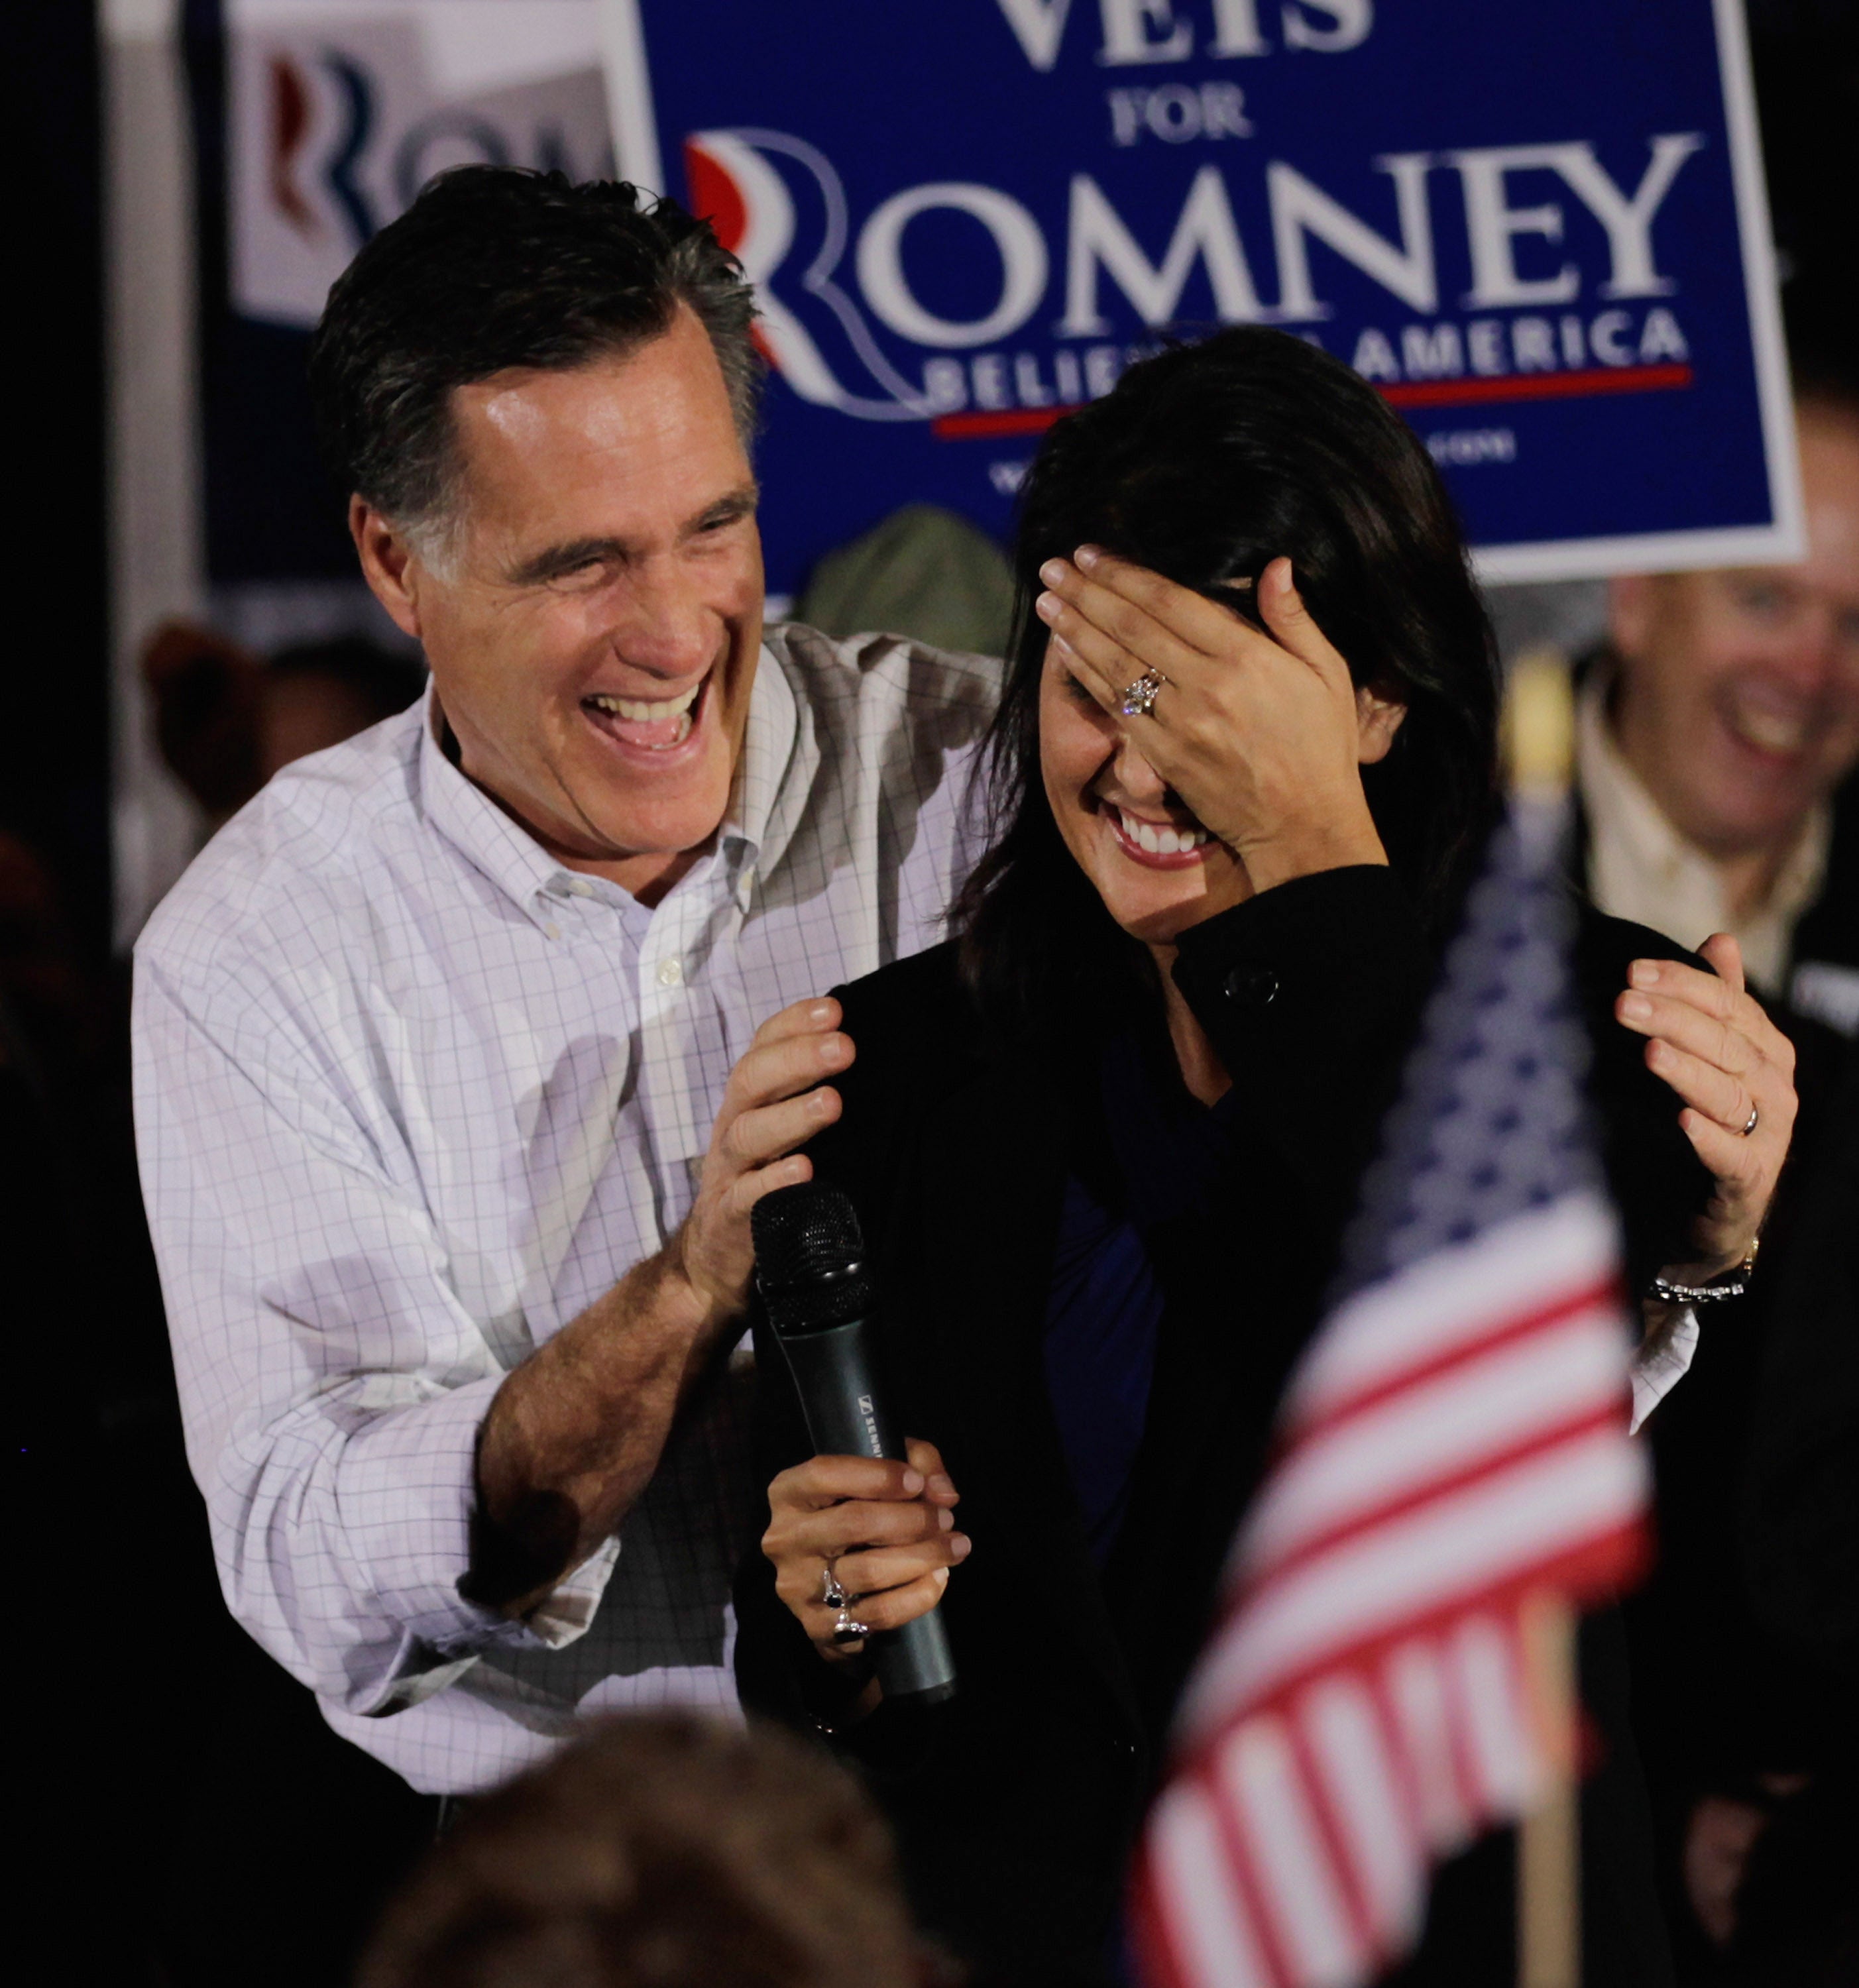 Republican presidential candidate, former Massachusetts Gov. Mitt Romney gives a birthday cake to South Carolina Gov. Nikki Haley during a campaign rally at Charleston Area Convention Center on January 20, 2012 in North Charleston, South Carolina